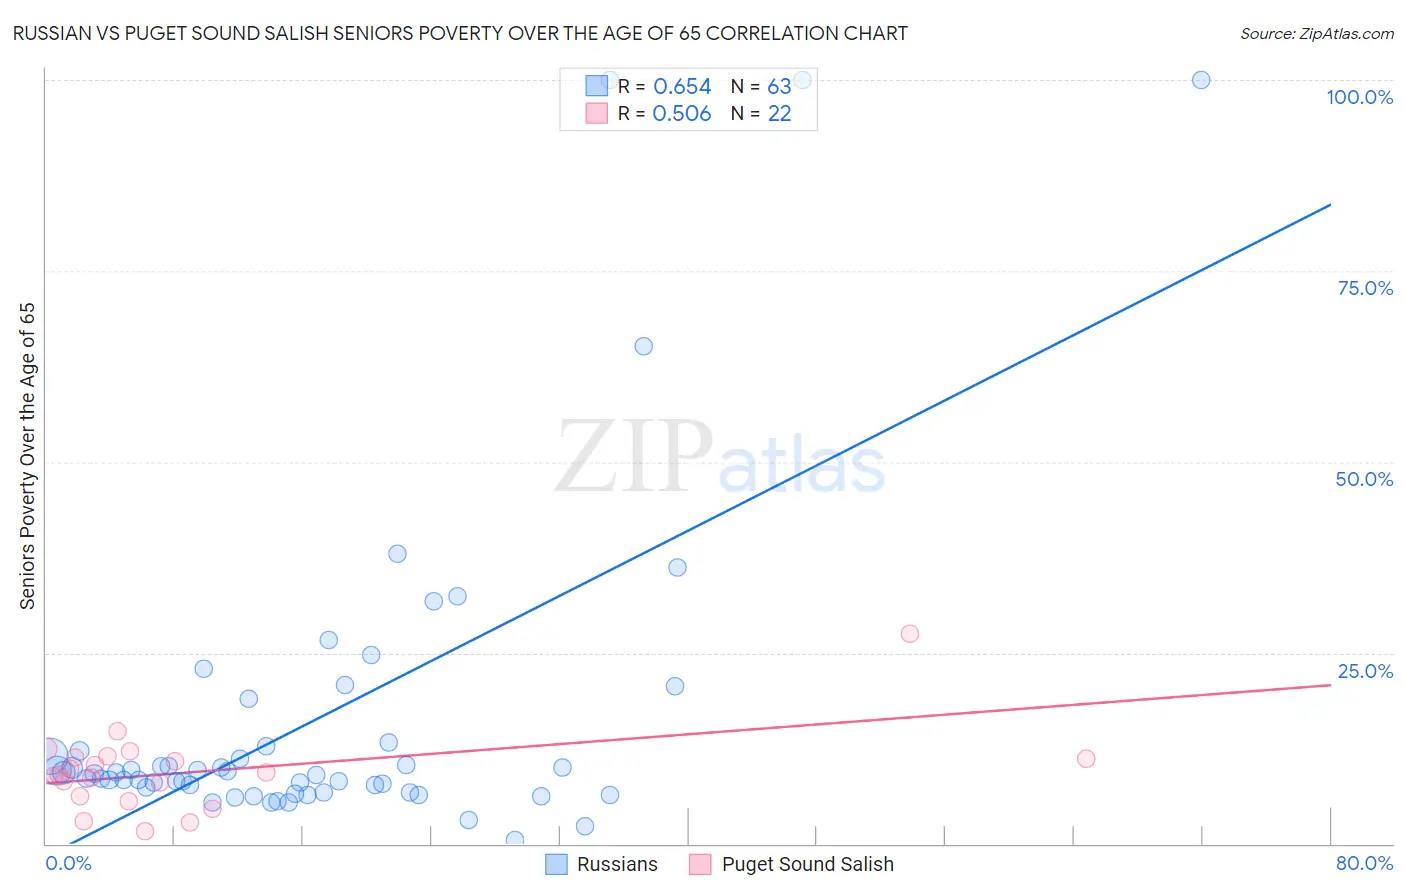 Russian vs Puget Sound Salish Seniors Poverty Over the Age of 65